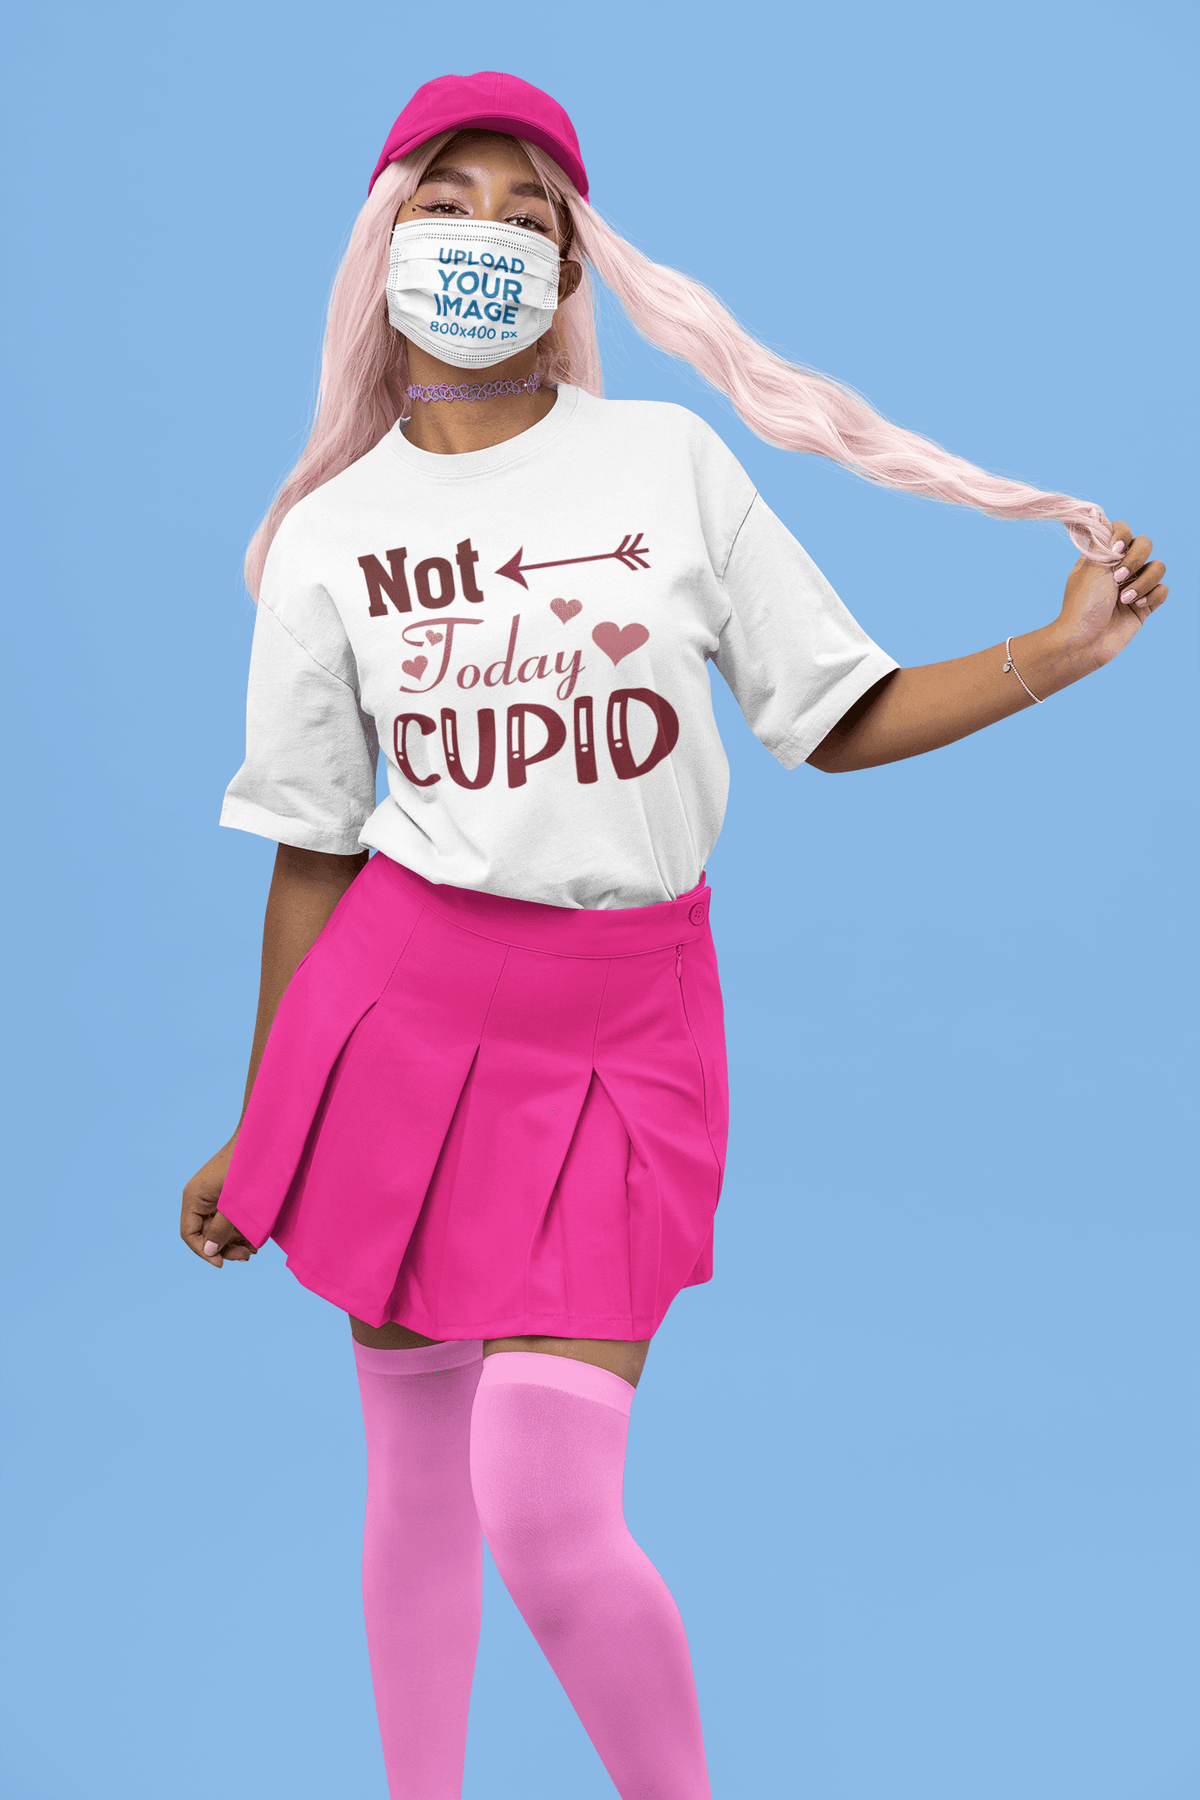 Not Today CUPID T-shirt-Regular Fit Tee-StylinArts